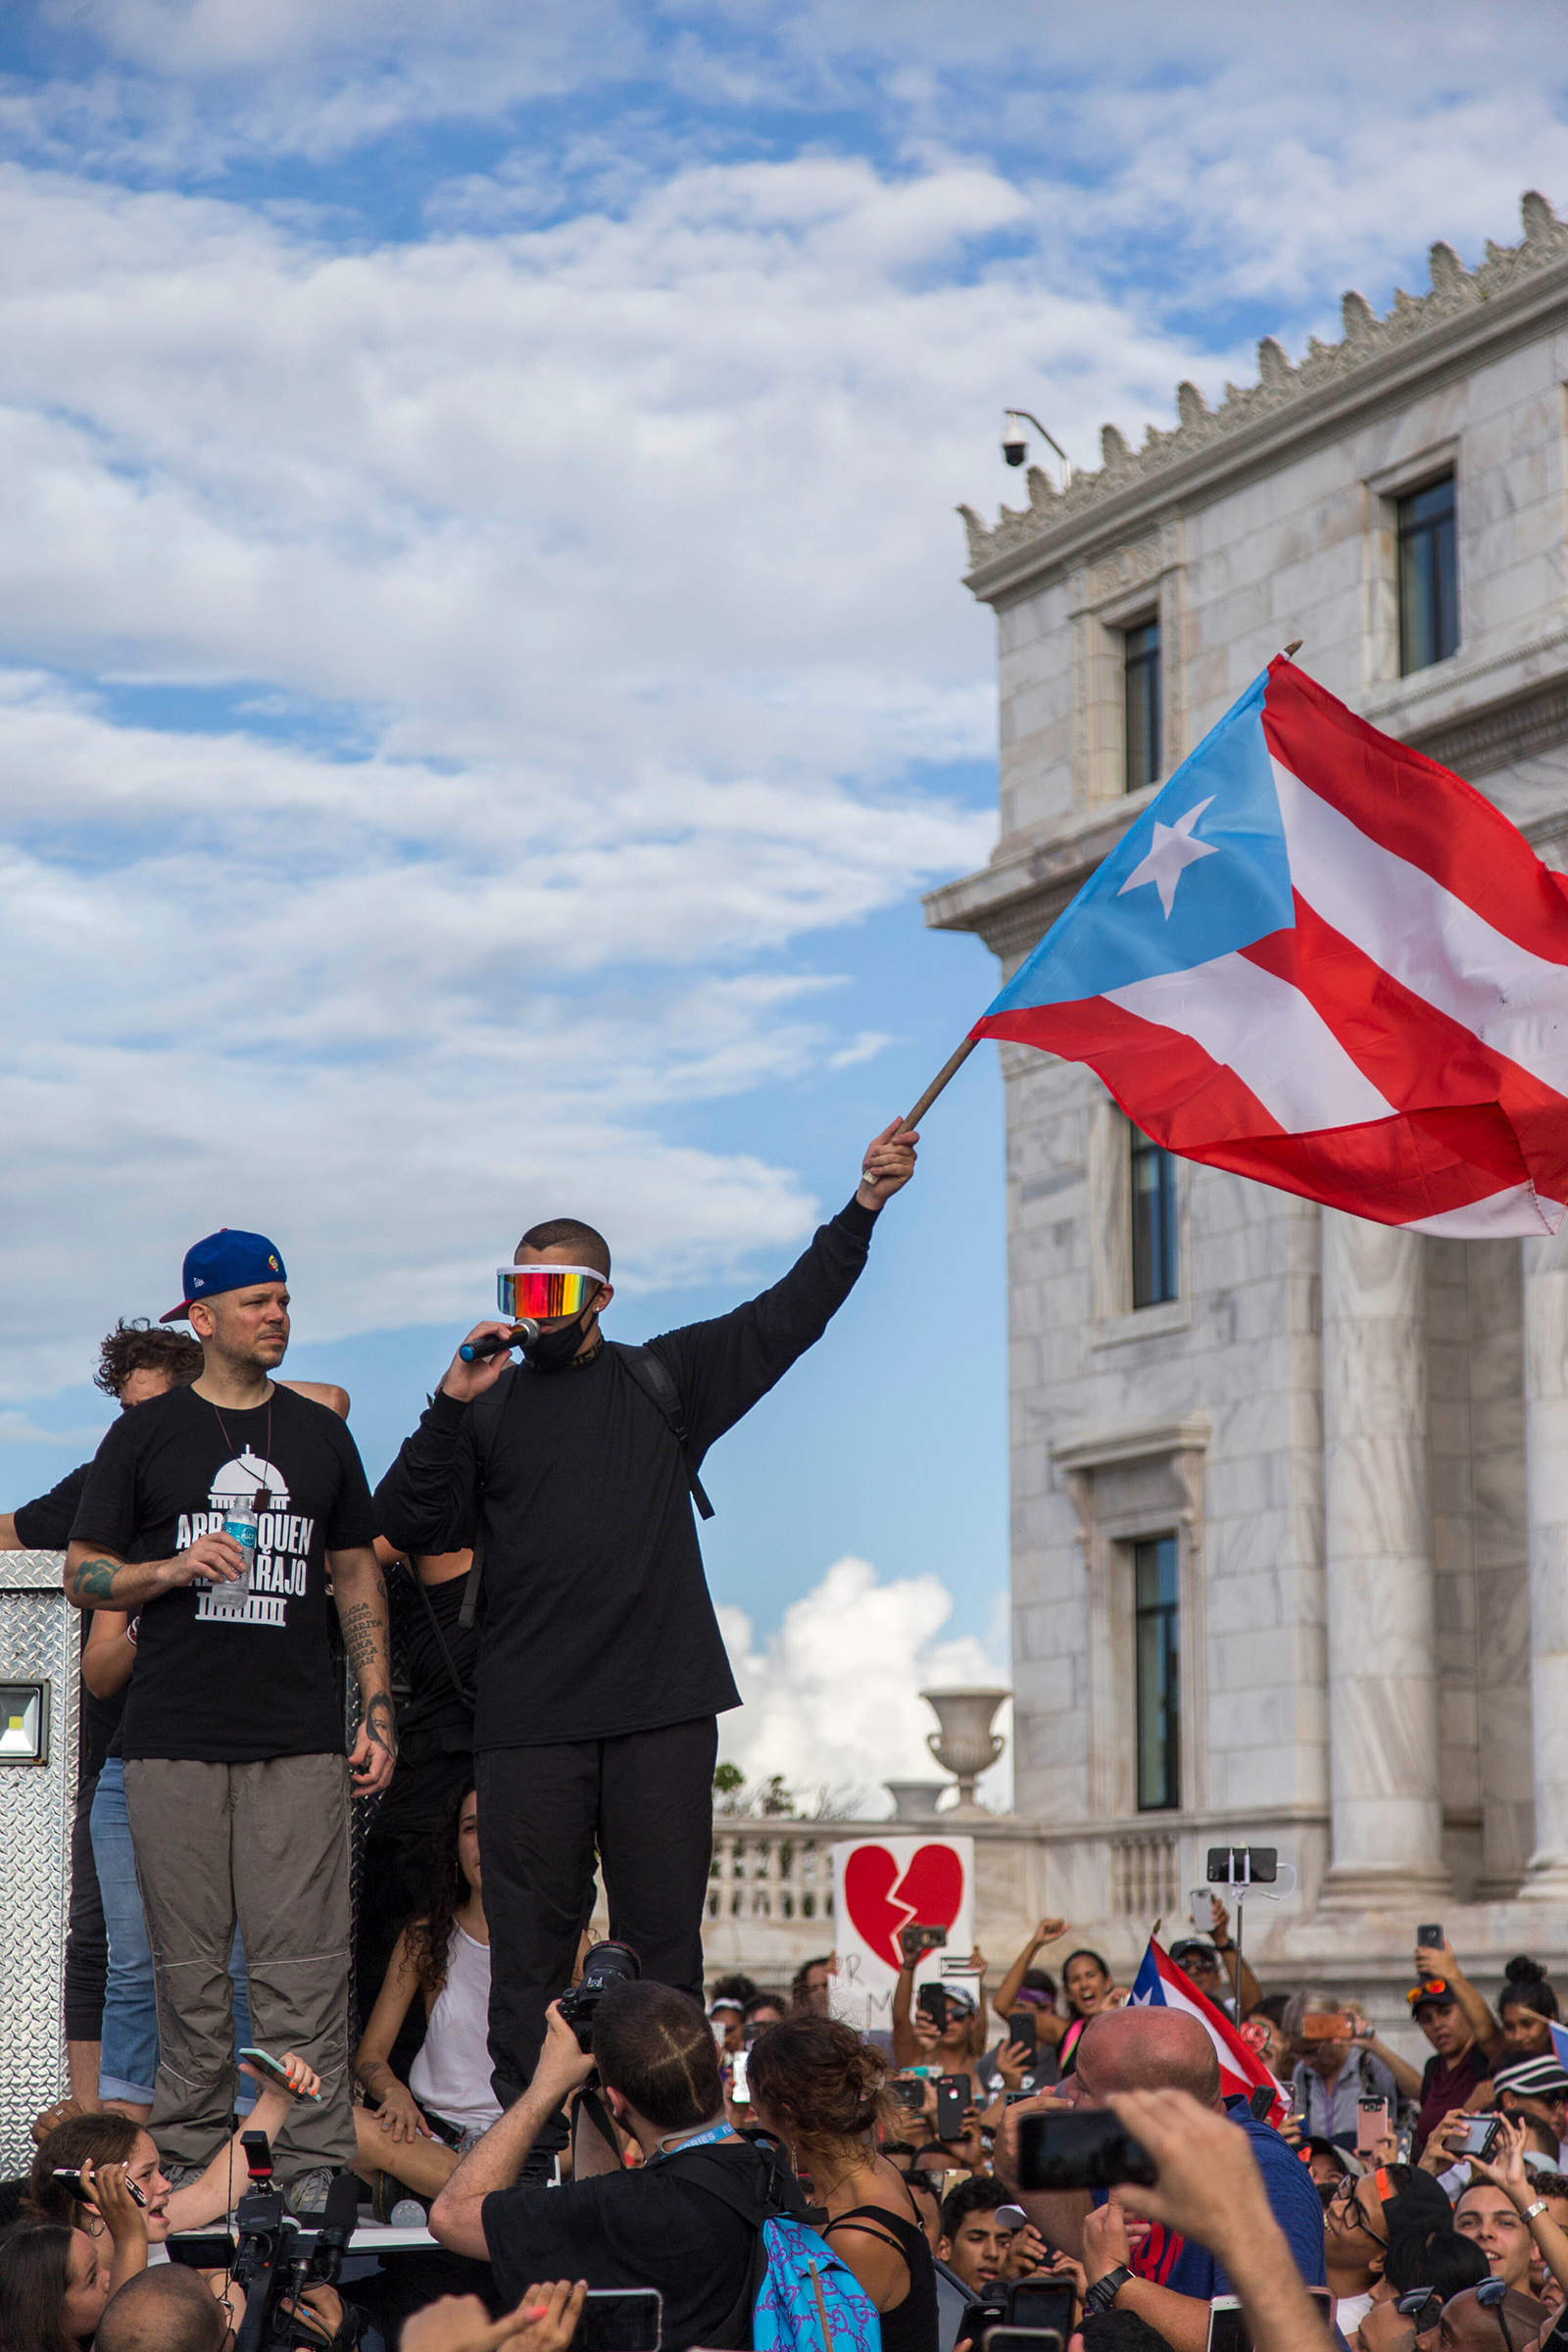 At a protest against Puerto Rico governor Rosselló in San Juan on July 17, 2019 (Copyright 2019 The Associated Press. All rights reserved)